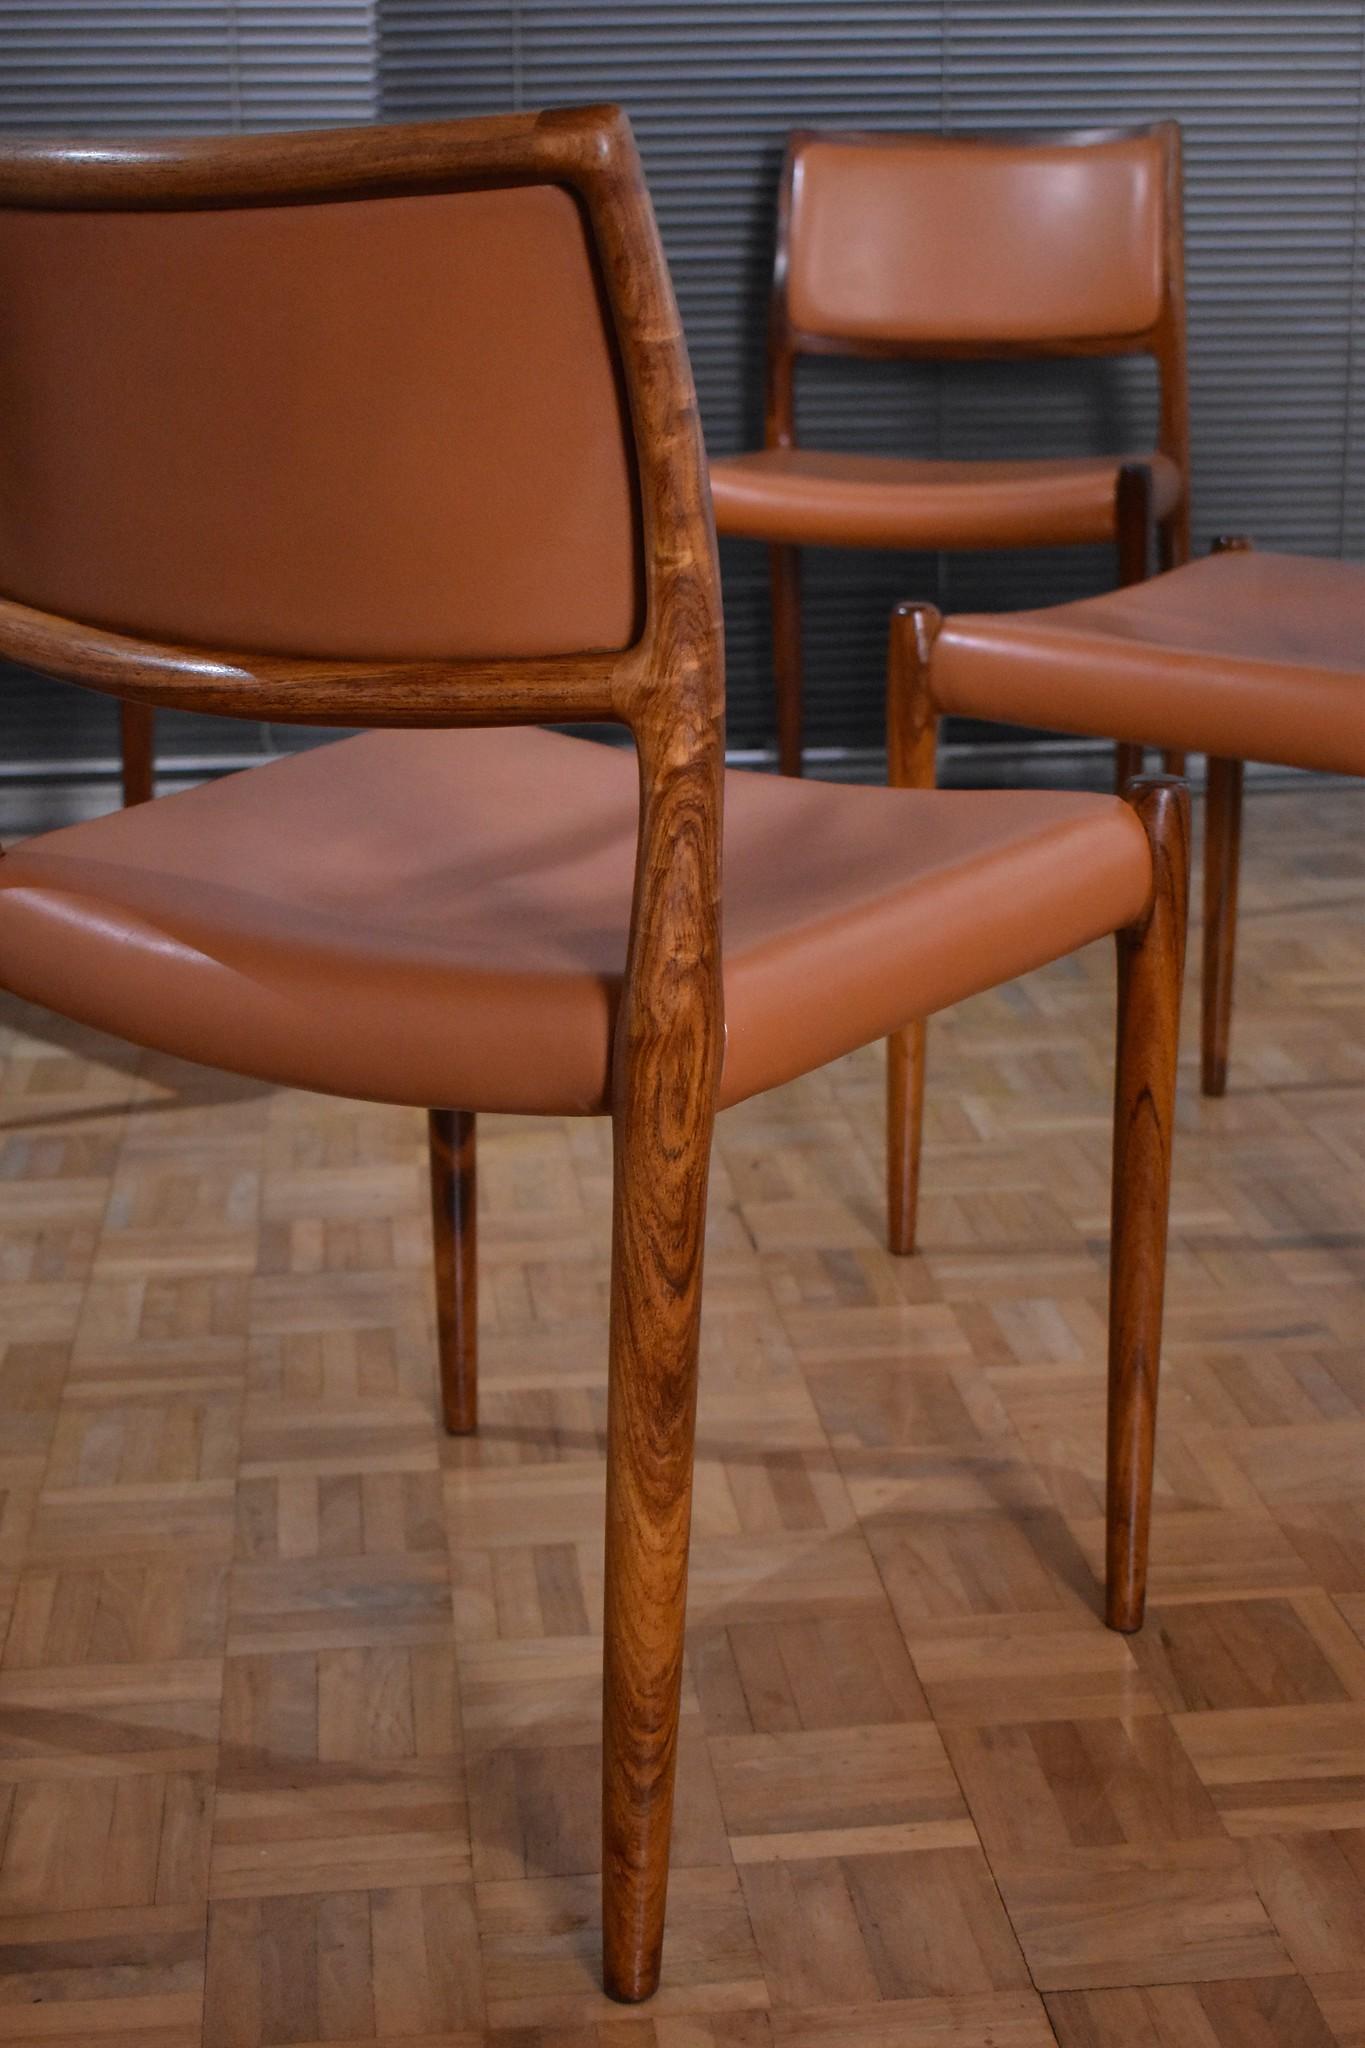 A very nice set of four Model 80 chairs designed by Niels Moller in 1968.

These chairs from the early 1970s feature particularly nice tan leather which has wonderful patina and contrasts beautifully against the rosewood frames.